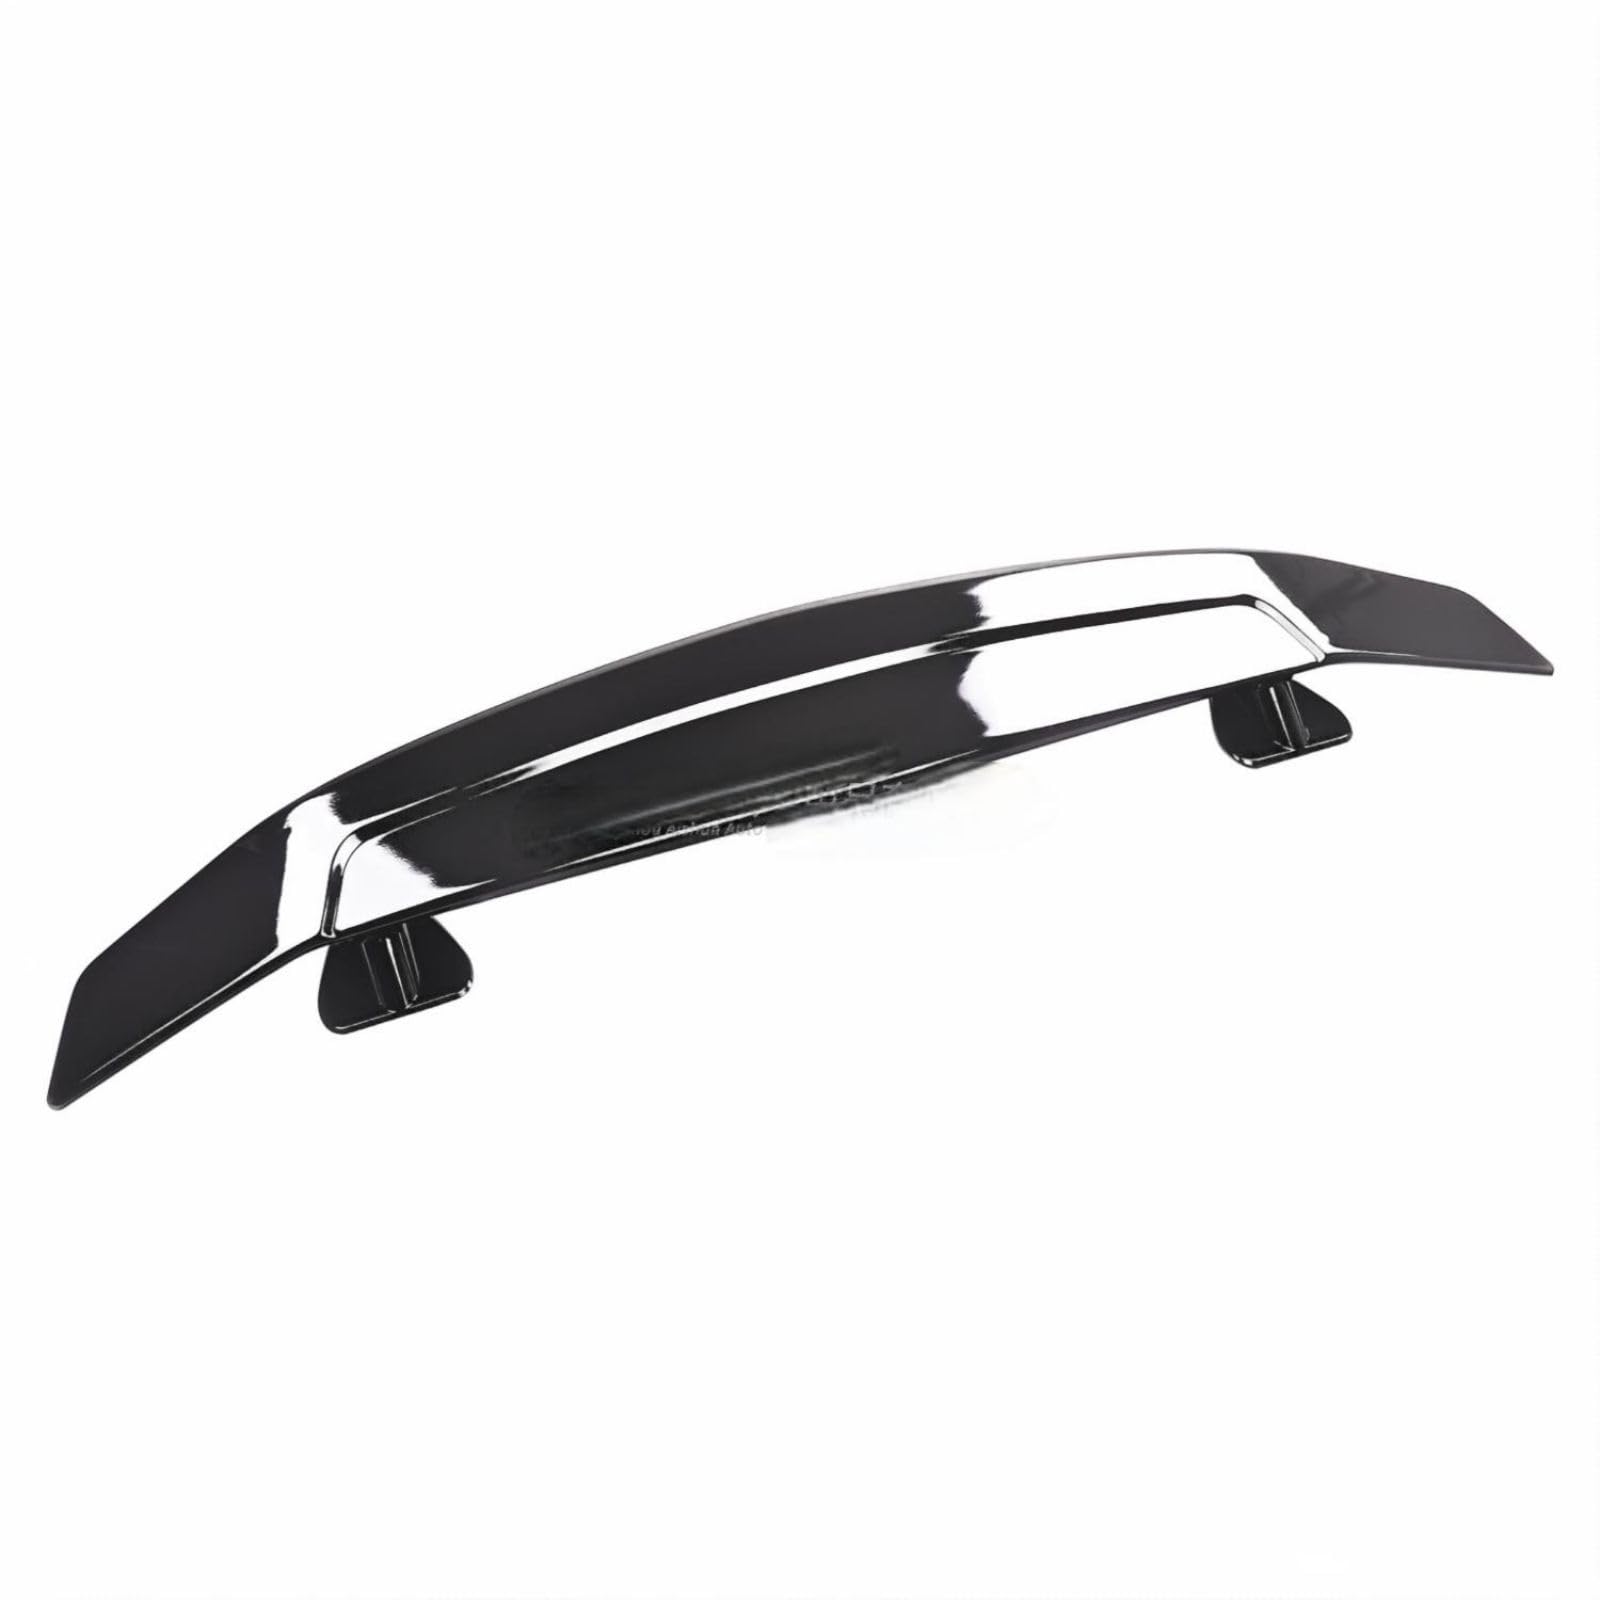 Car Rear Window Spoiler for Ford Mondeo IV Sedan 2014-2018, without Perforation Lid Spoiler Wings Installation Rear Wing Decoration,Bright Black von EESWCSZZ3